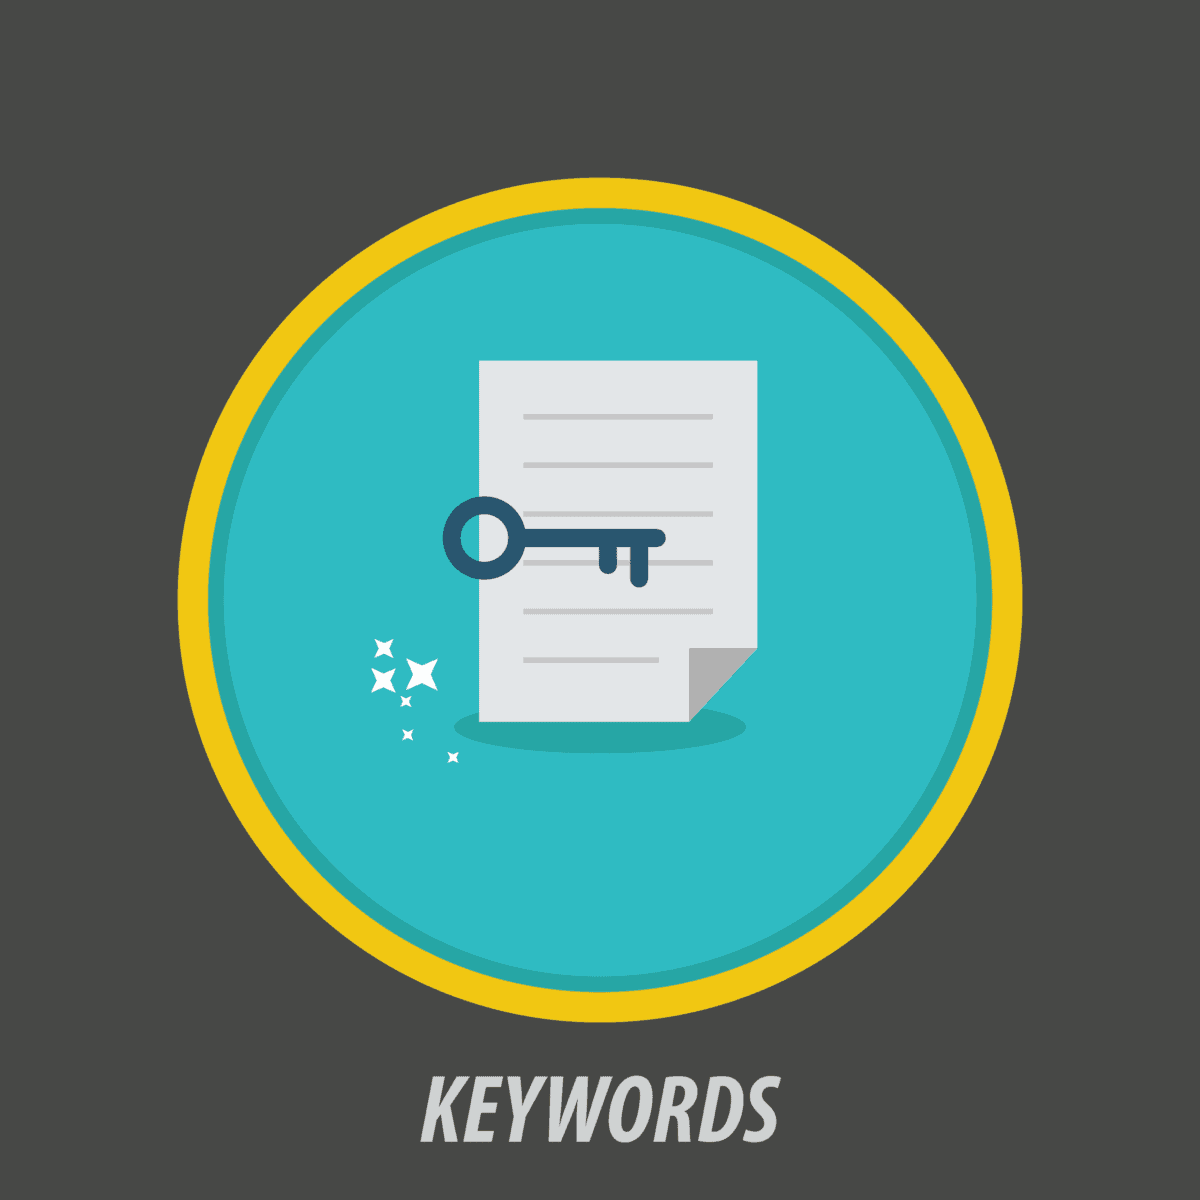 The content of your website: keywords